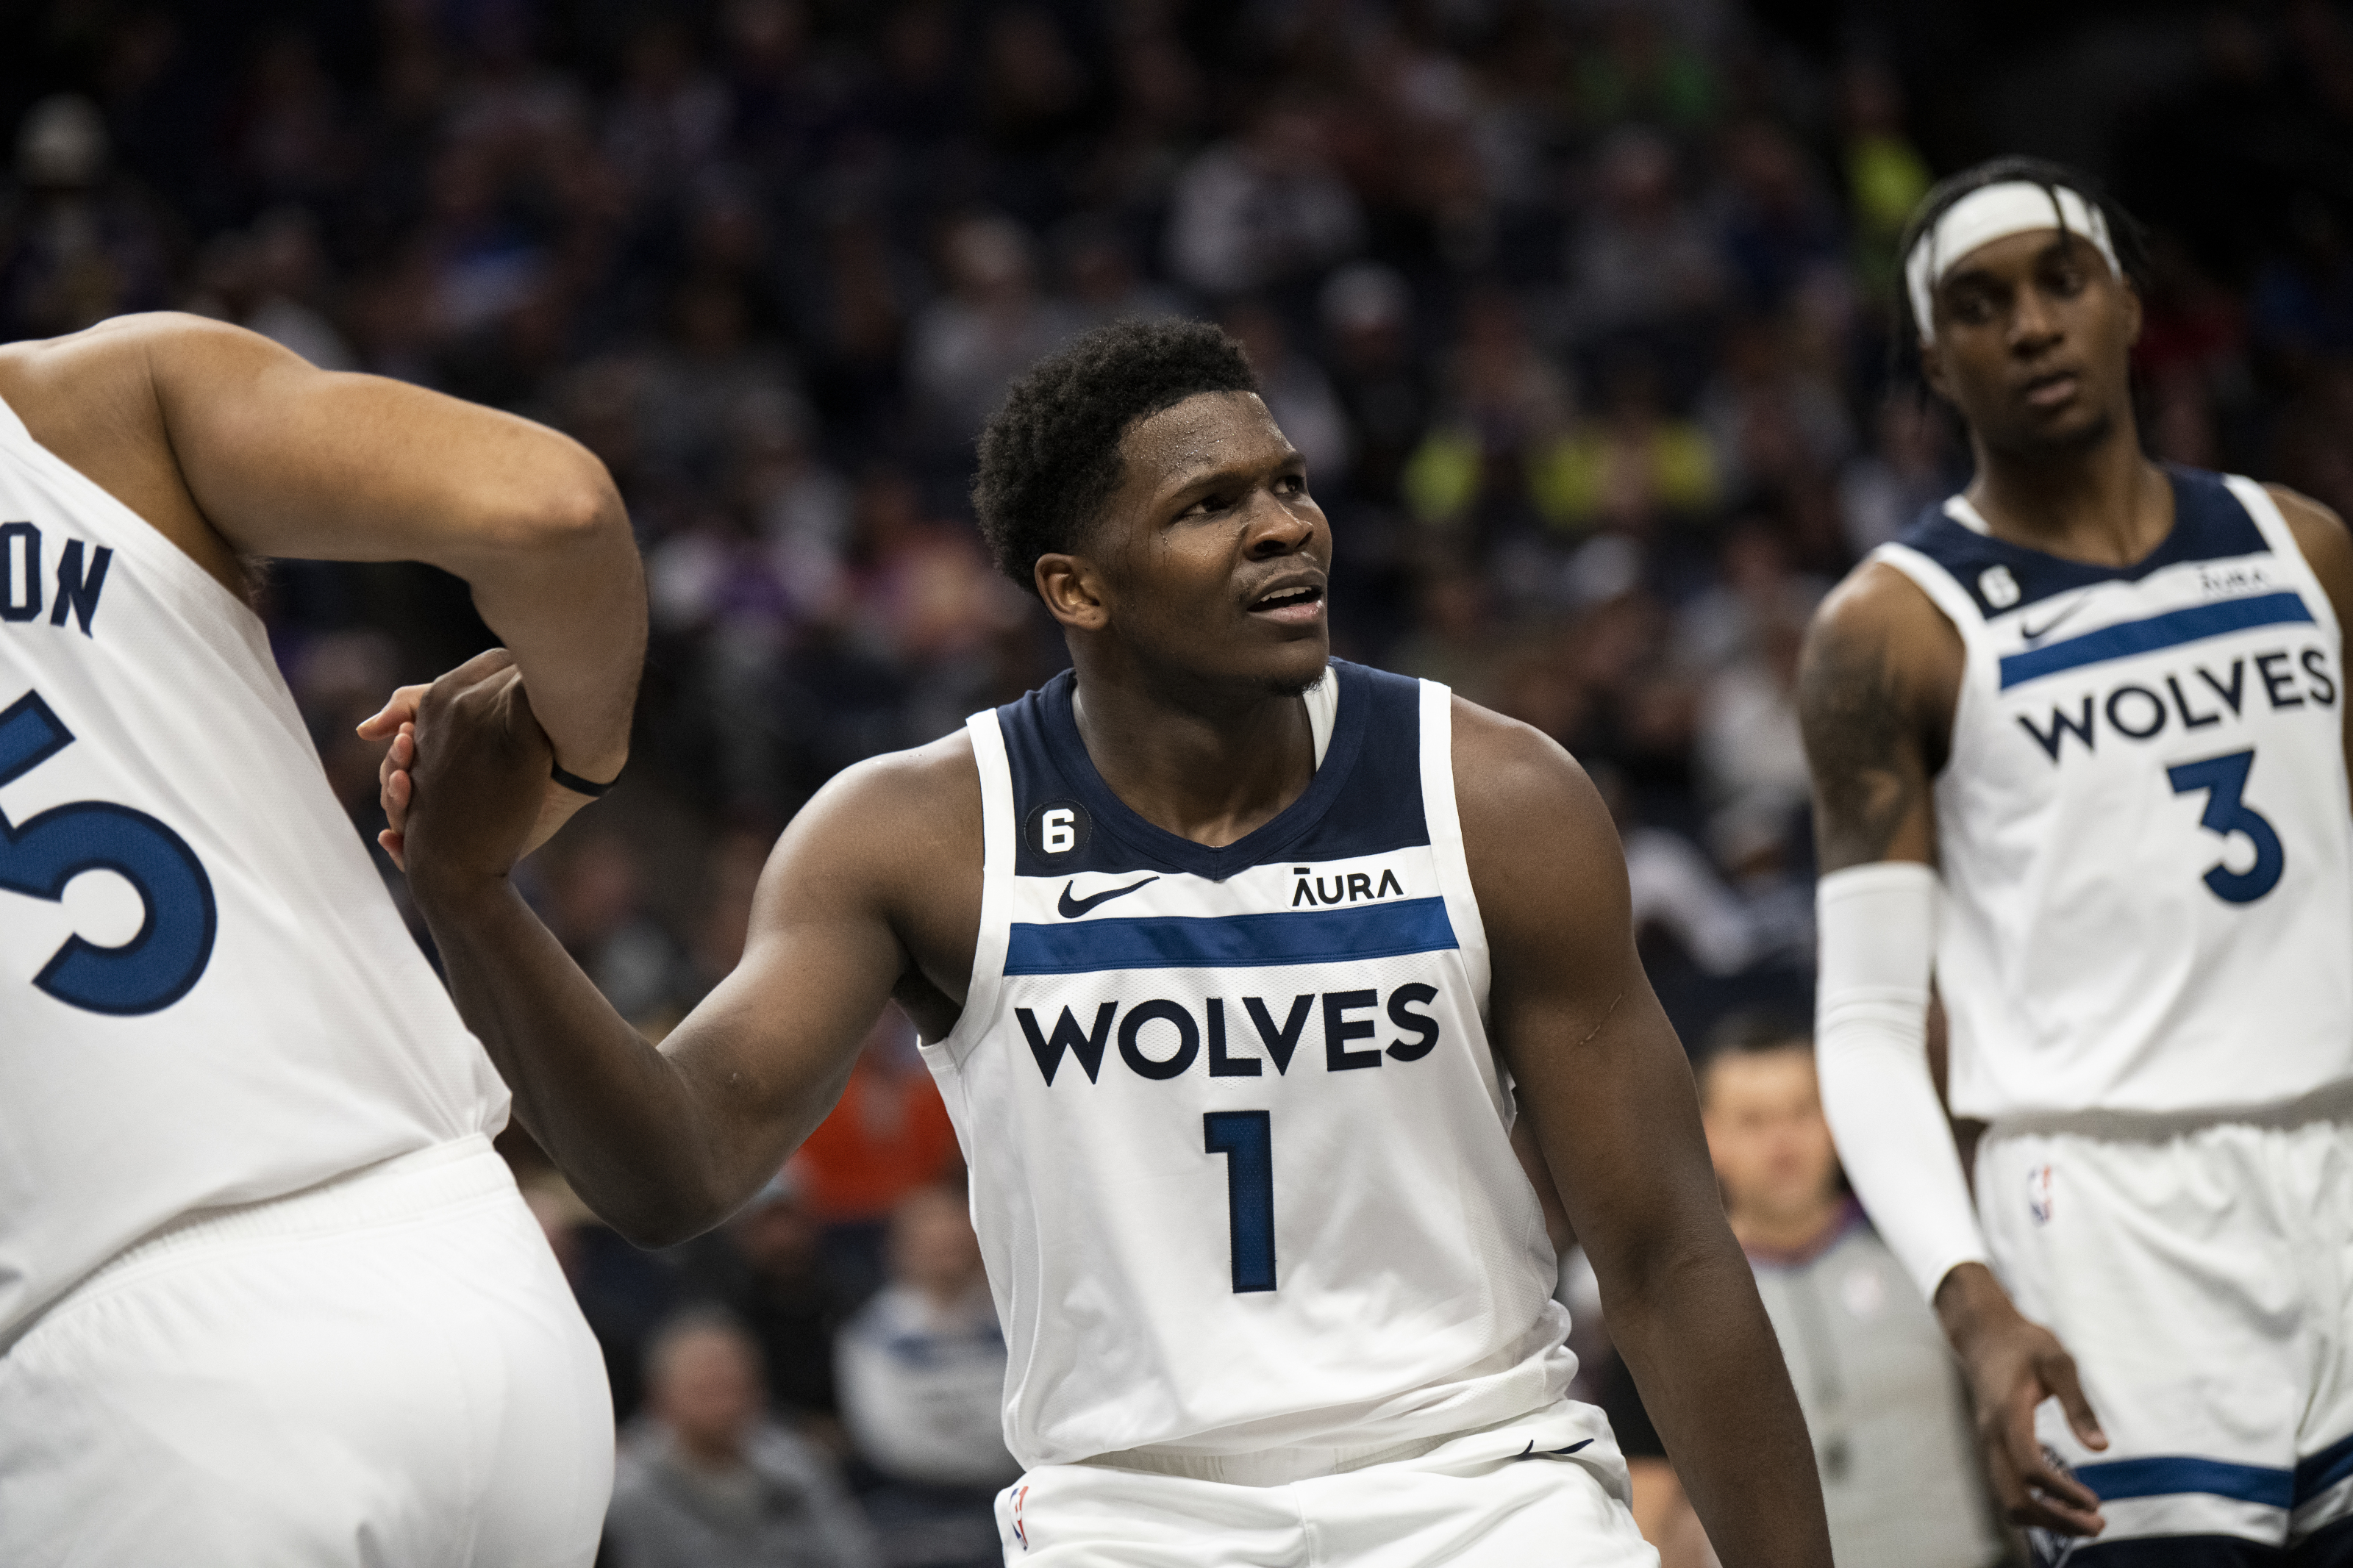 NBA: Timberwolves Guard Anthony Edwards to Switch Jersey Number